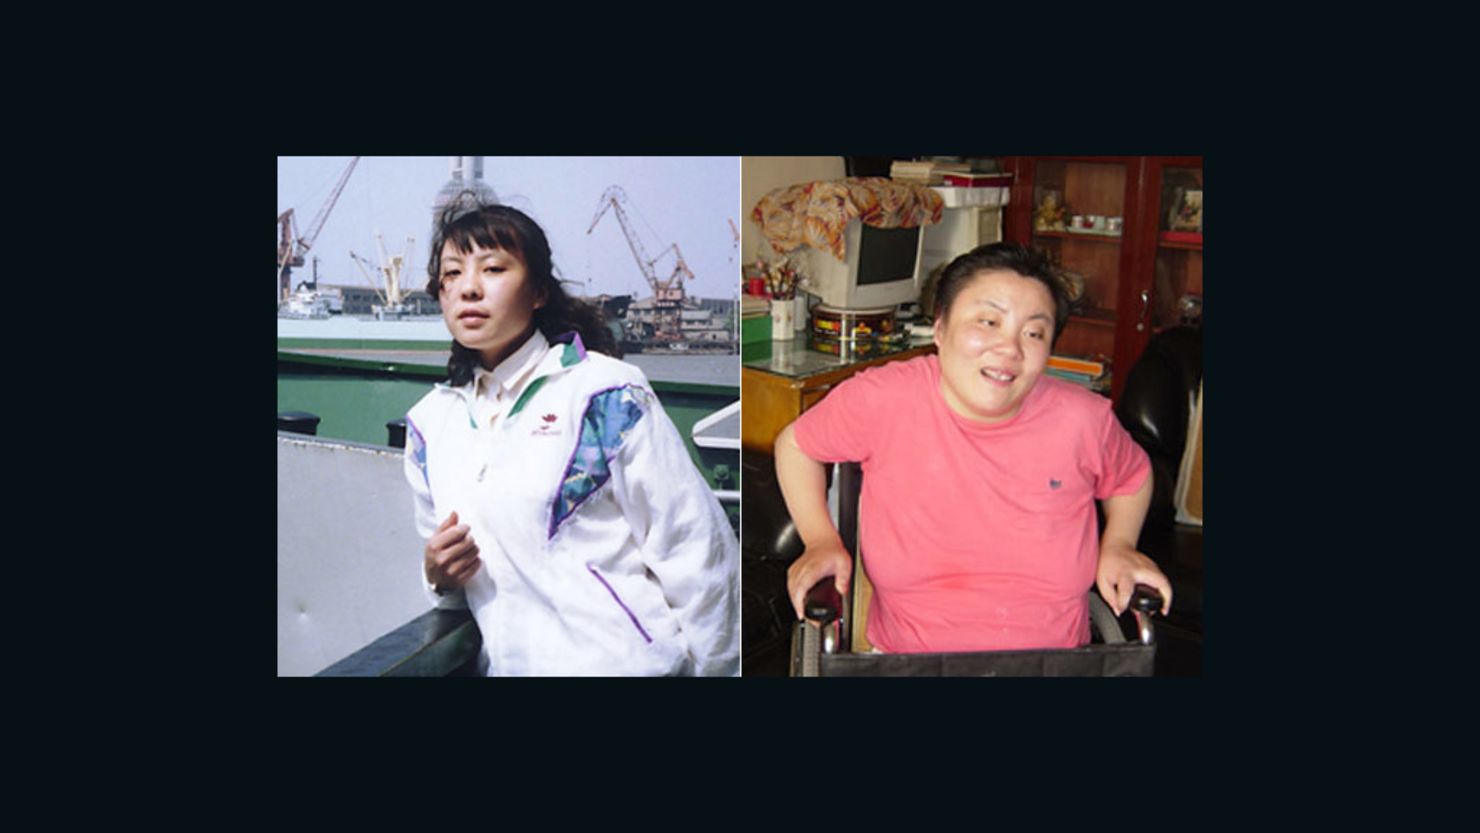 Zhu Ling was poisoned with thallium in 1994 but no one has been charged or prosecuted over the act.